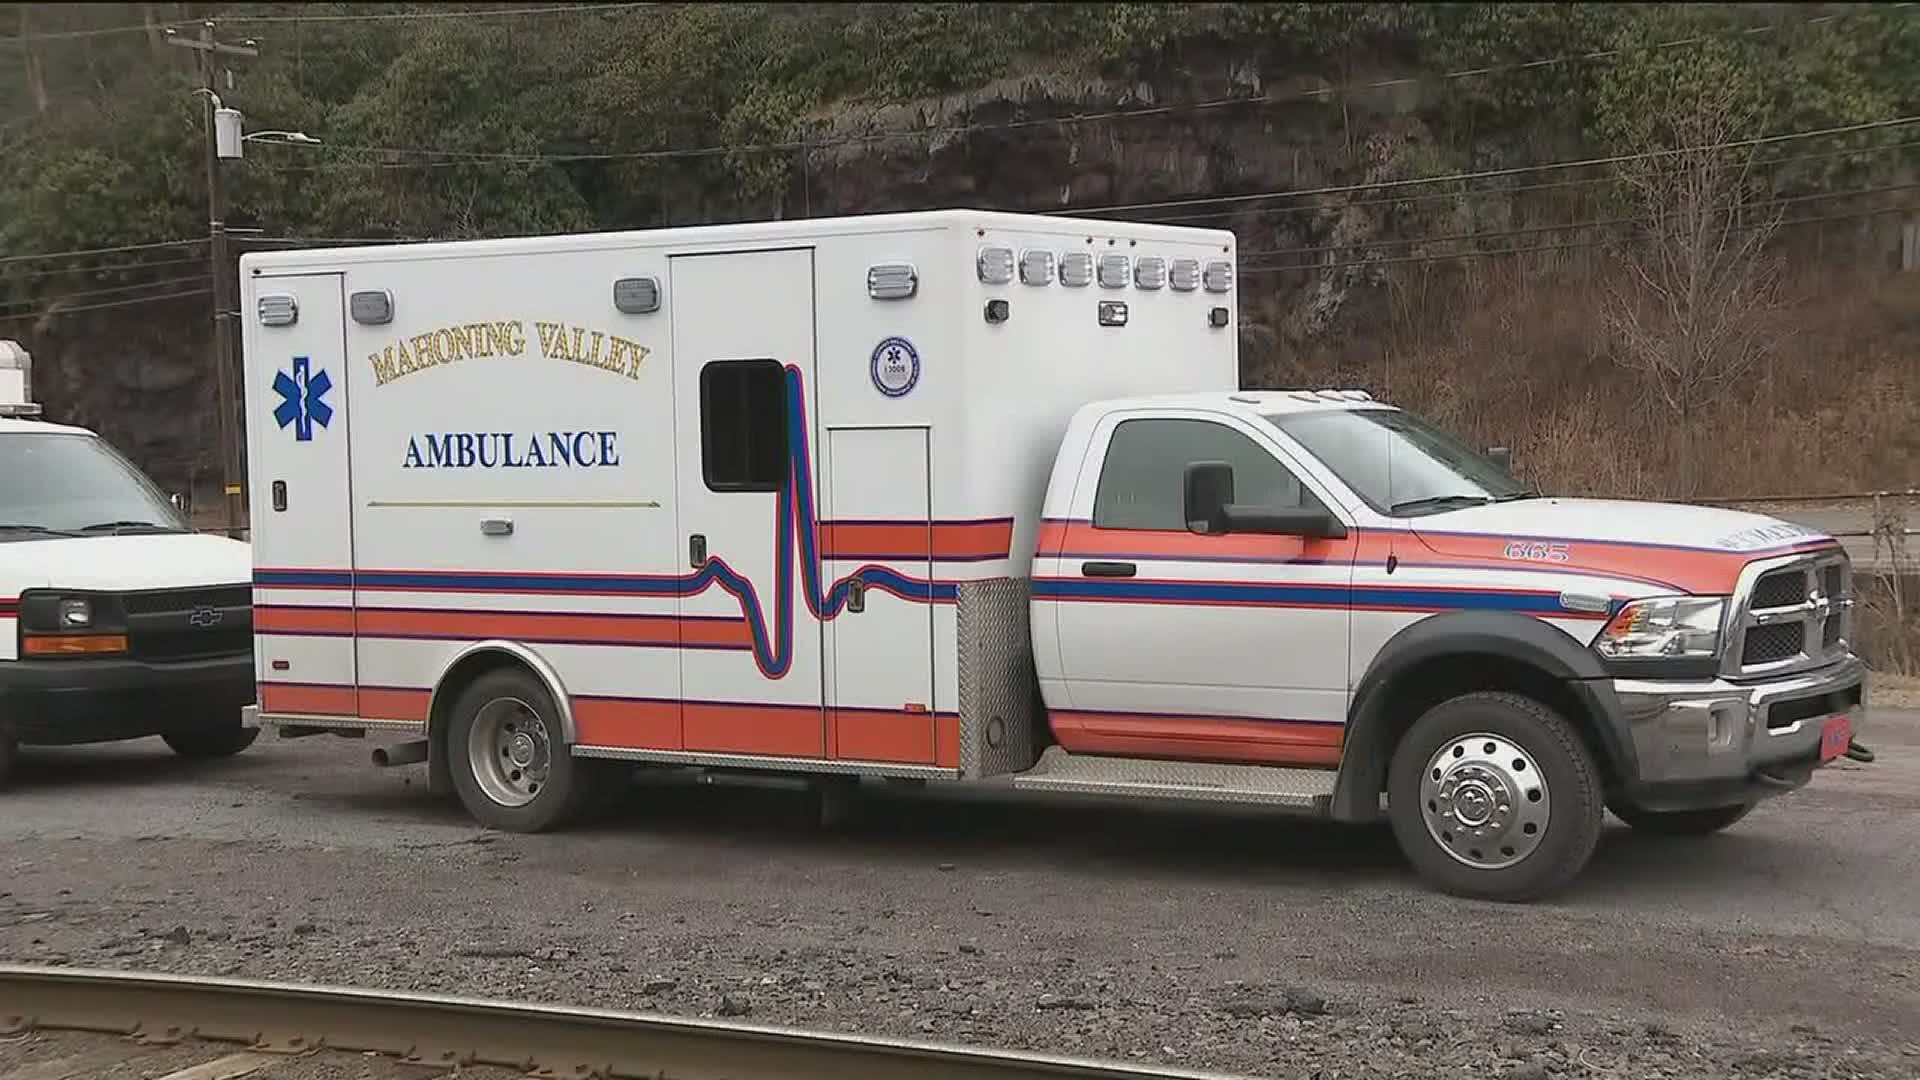 After answering calls for more than 40 years, a long-time ambulance association is no longer responding to emergencies in Weatherly.